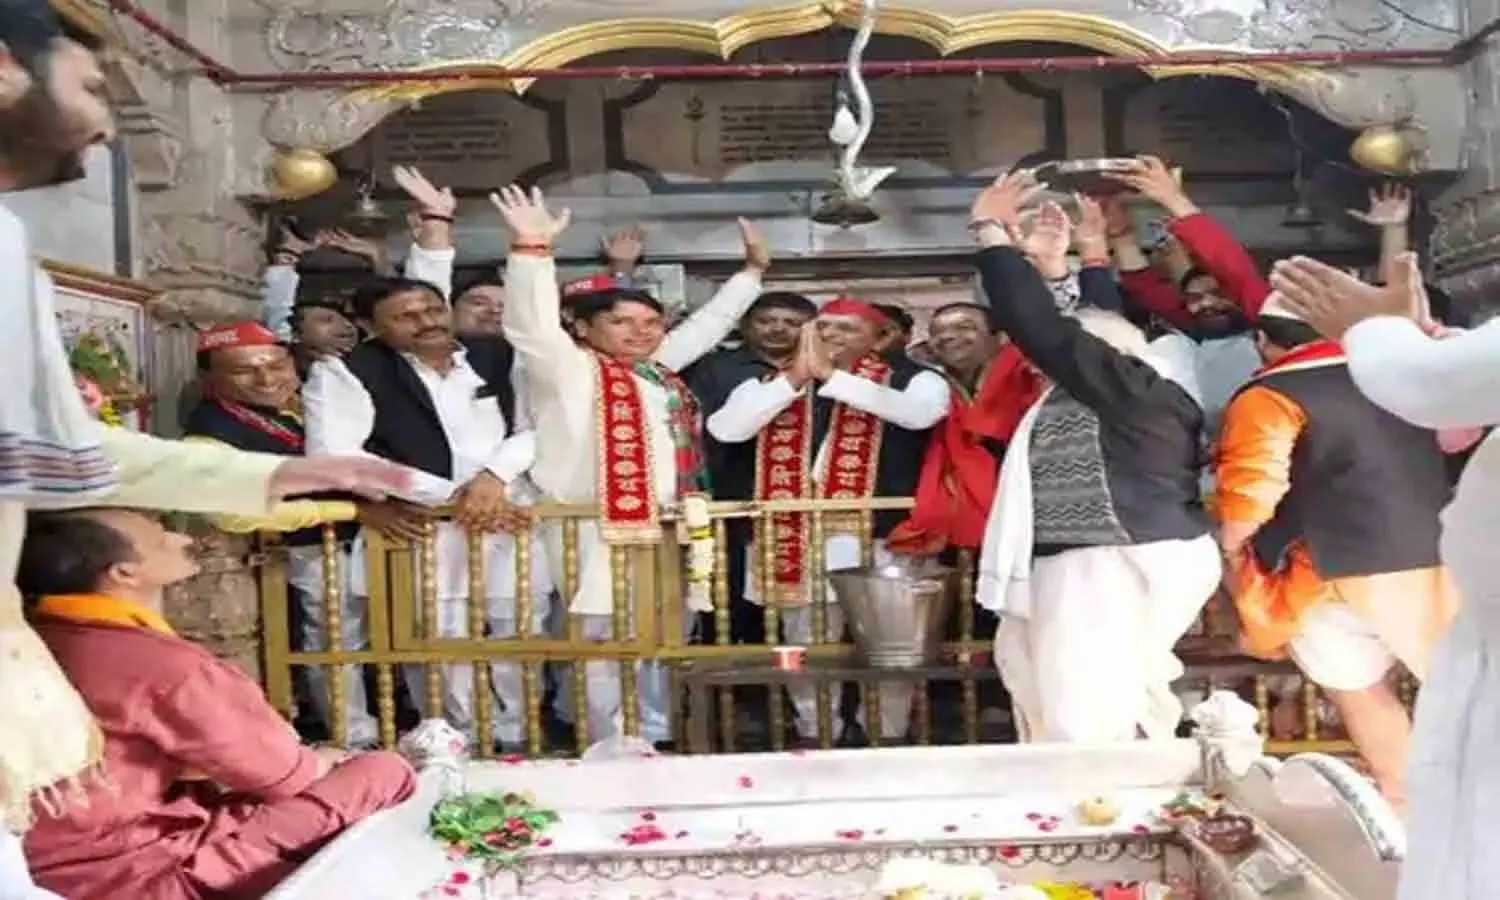 UP Election 2022: SP chief took blessings from Kotwal of Kashi, Akhilesh roared fiercely in Azamgarh rally